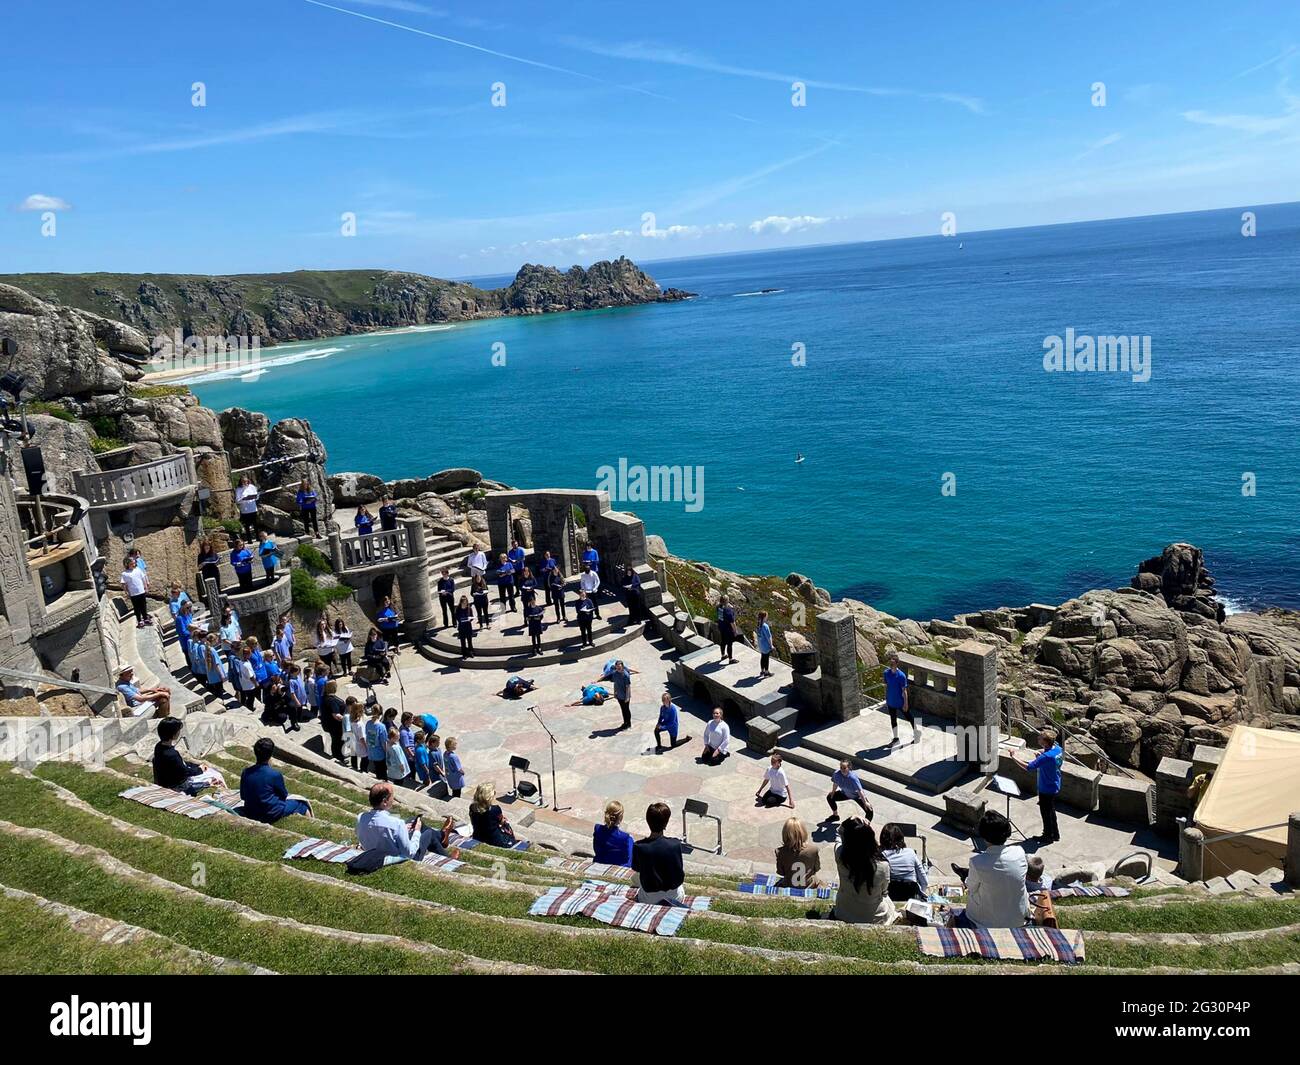 Porthcurno, UK. 12th June, 2021. Spouses of G7 leaders watch a performance of Ocean World by Cornish children at the Minack Theatre on the sidelines of the G7 Summit overlooking Porthcurno Bay June 12, 2021 in Porthcurno, Penzance, United Kingdom. Credit: Planetpix/Alamy Live News Stock Photo